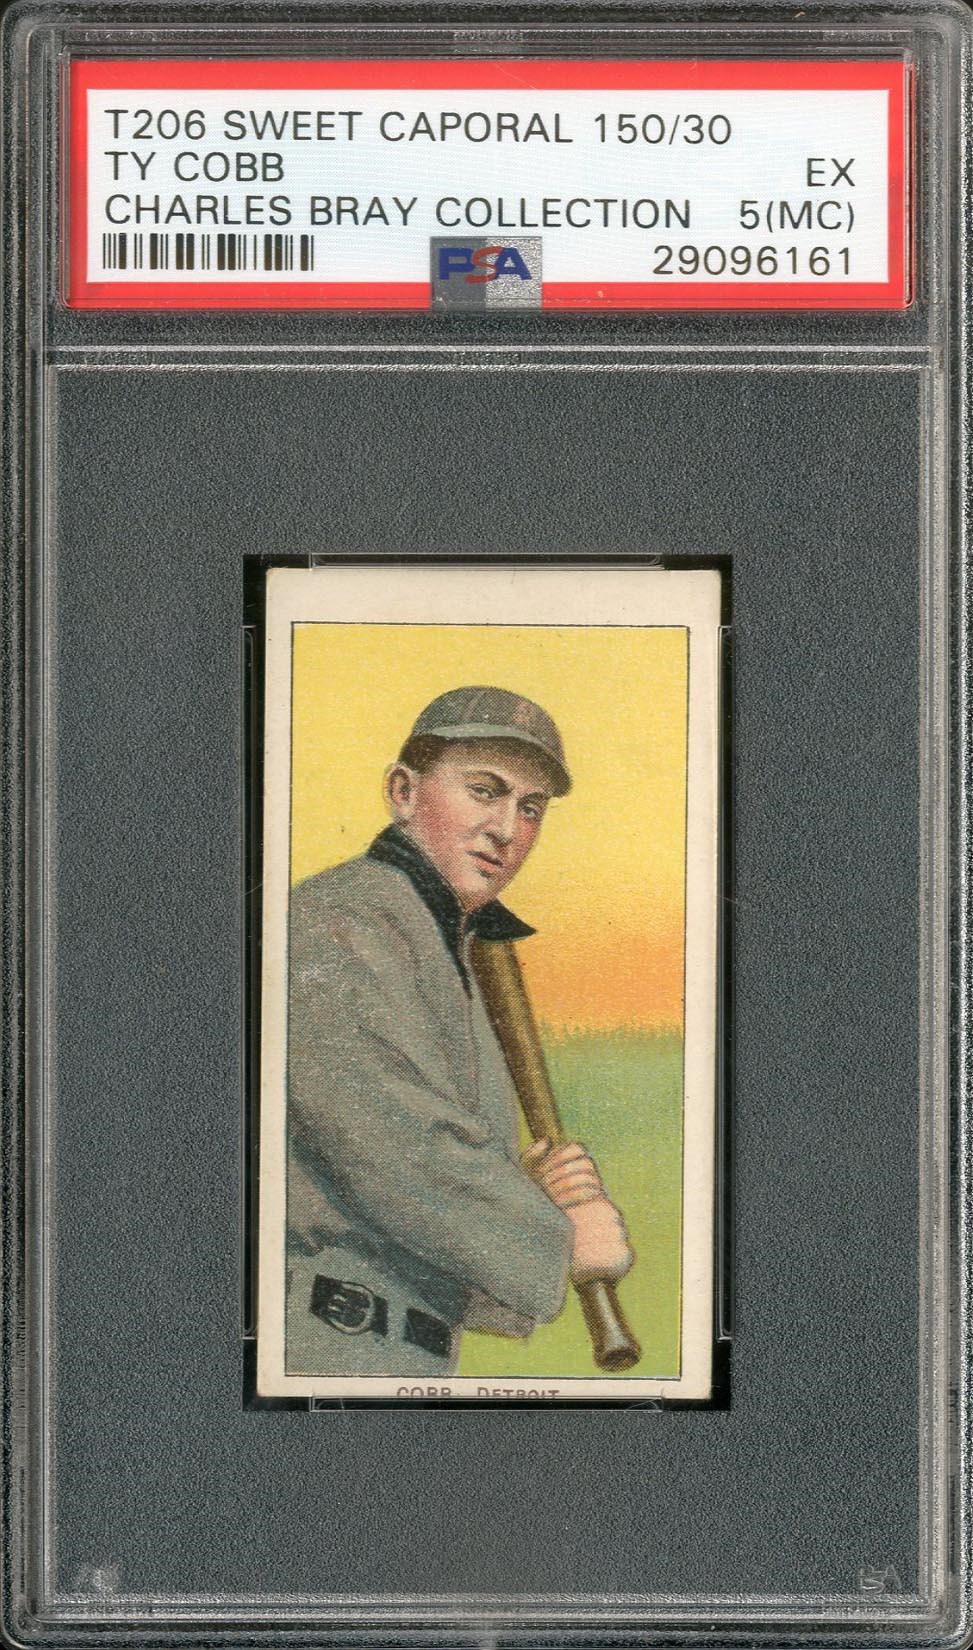 Baseball and Trading Cards - 1909 T206 Ty Cobb Bat on Shoulder PSA EX 5 MC - The Charles Bray Collection